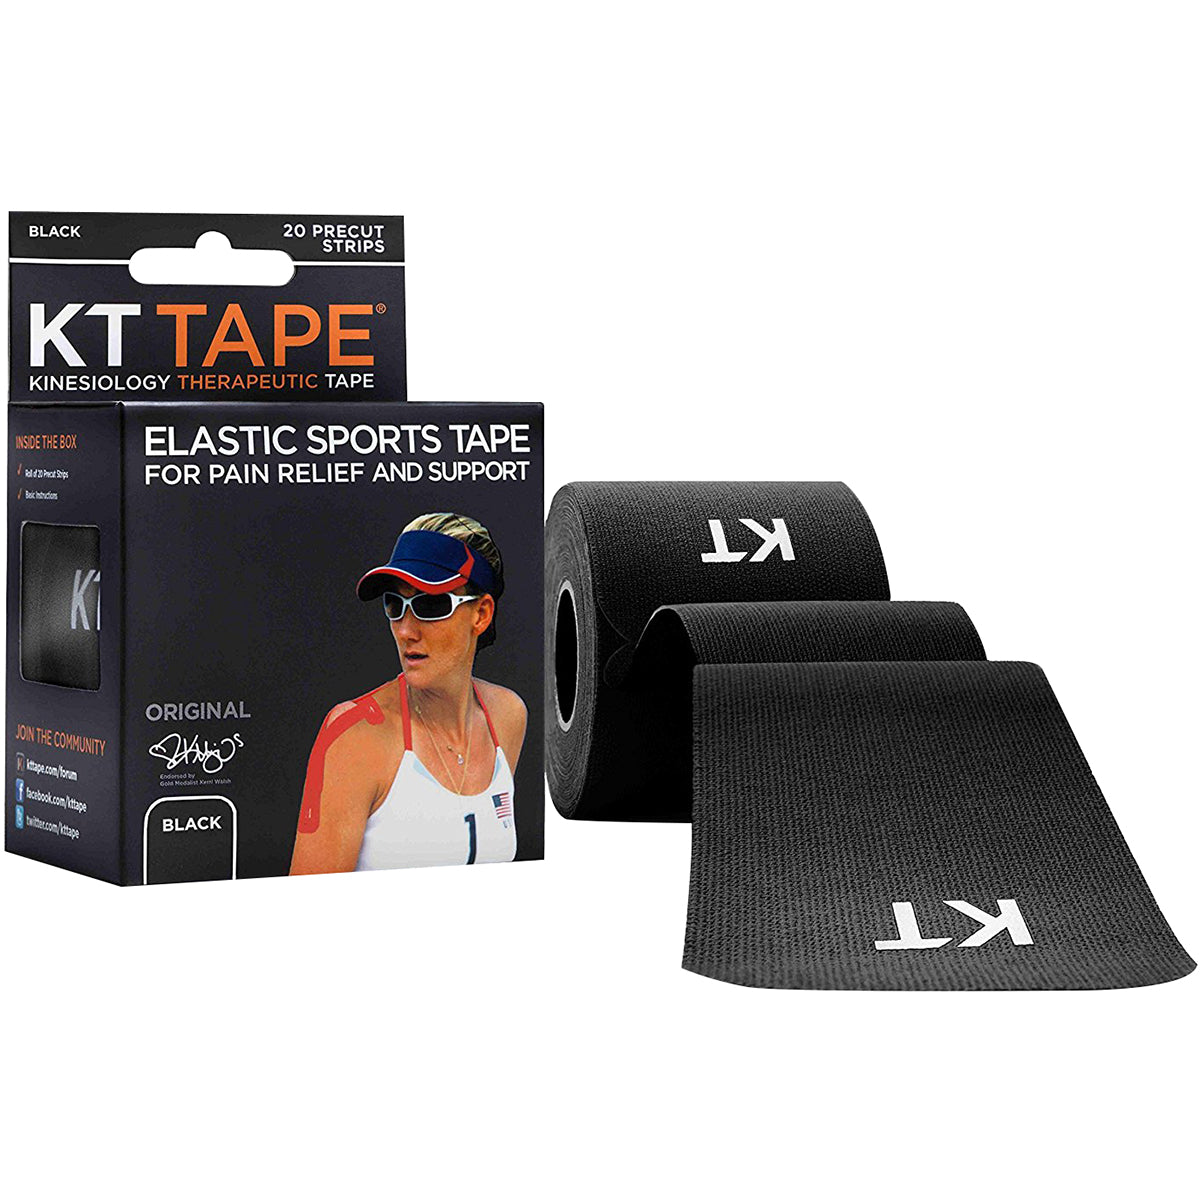 KT Tape Cotton 10" Precut Kinesiology Therapeutic Sports Roll, 20 Strips, Black KT Tape